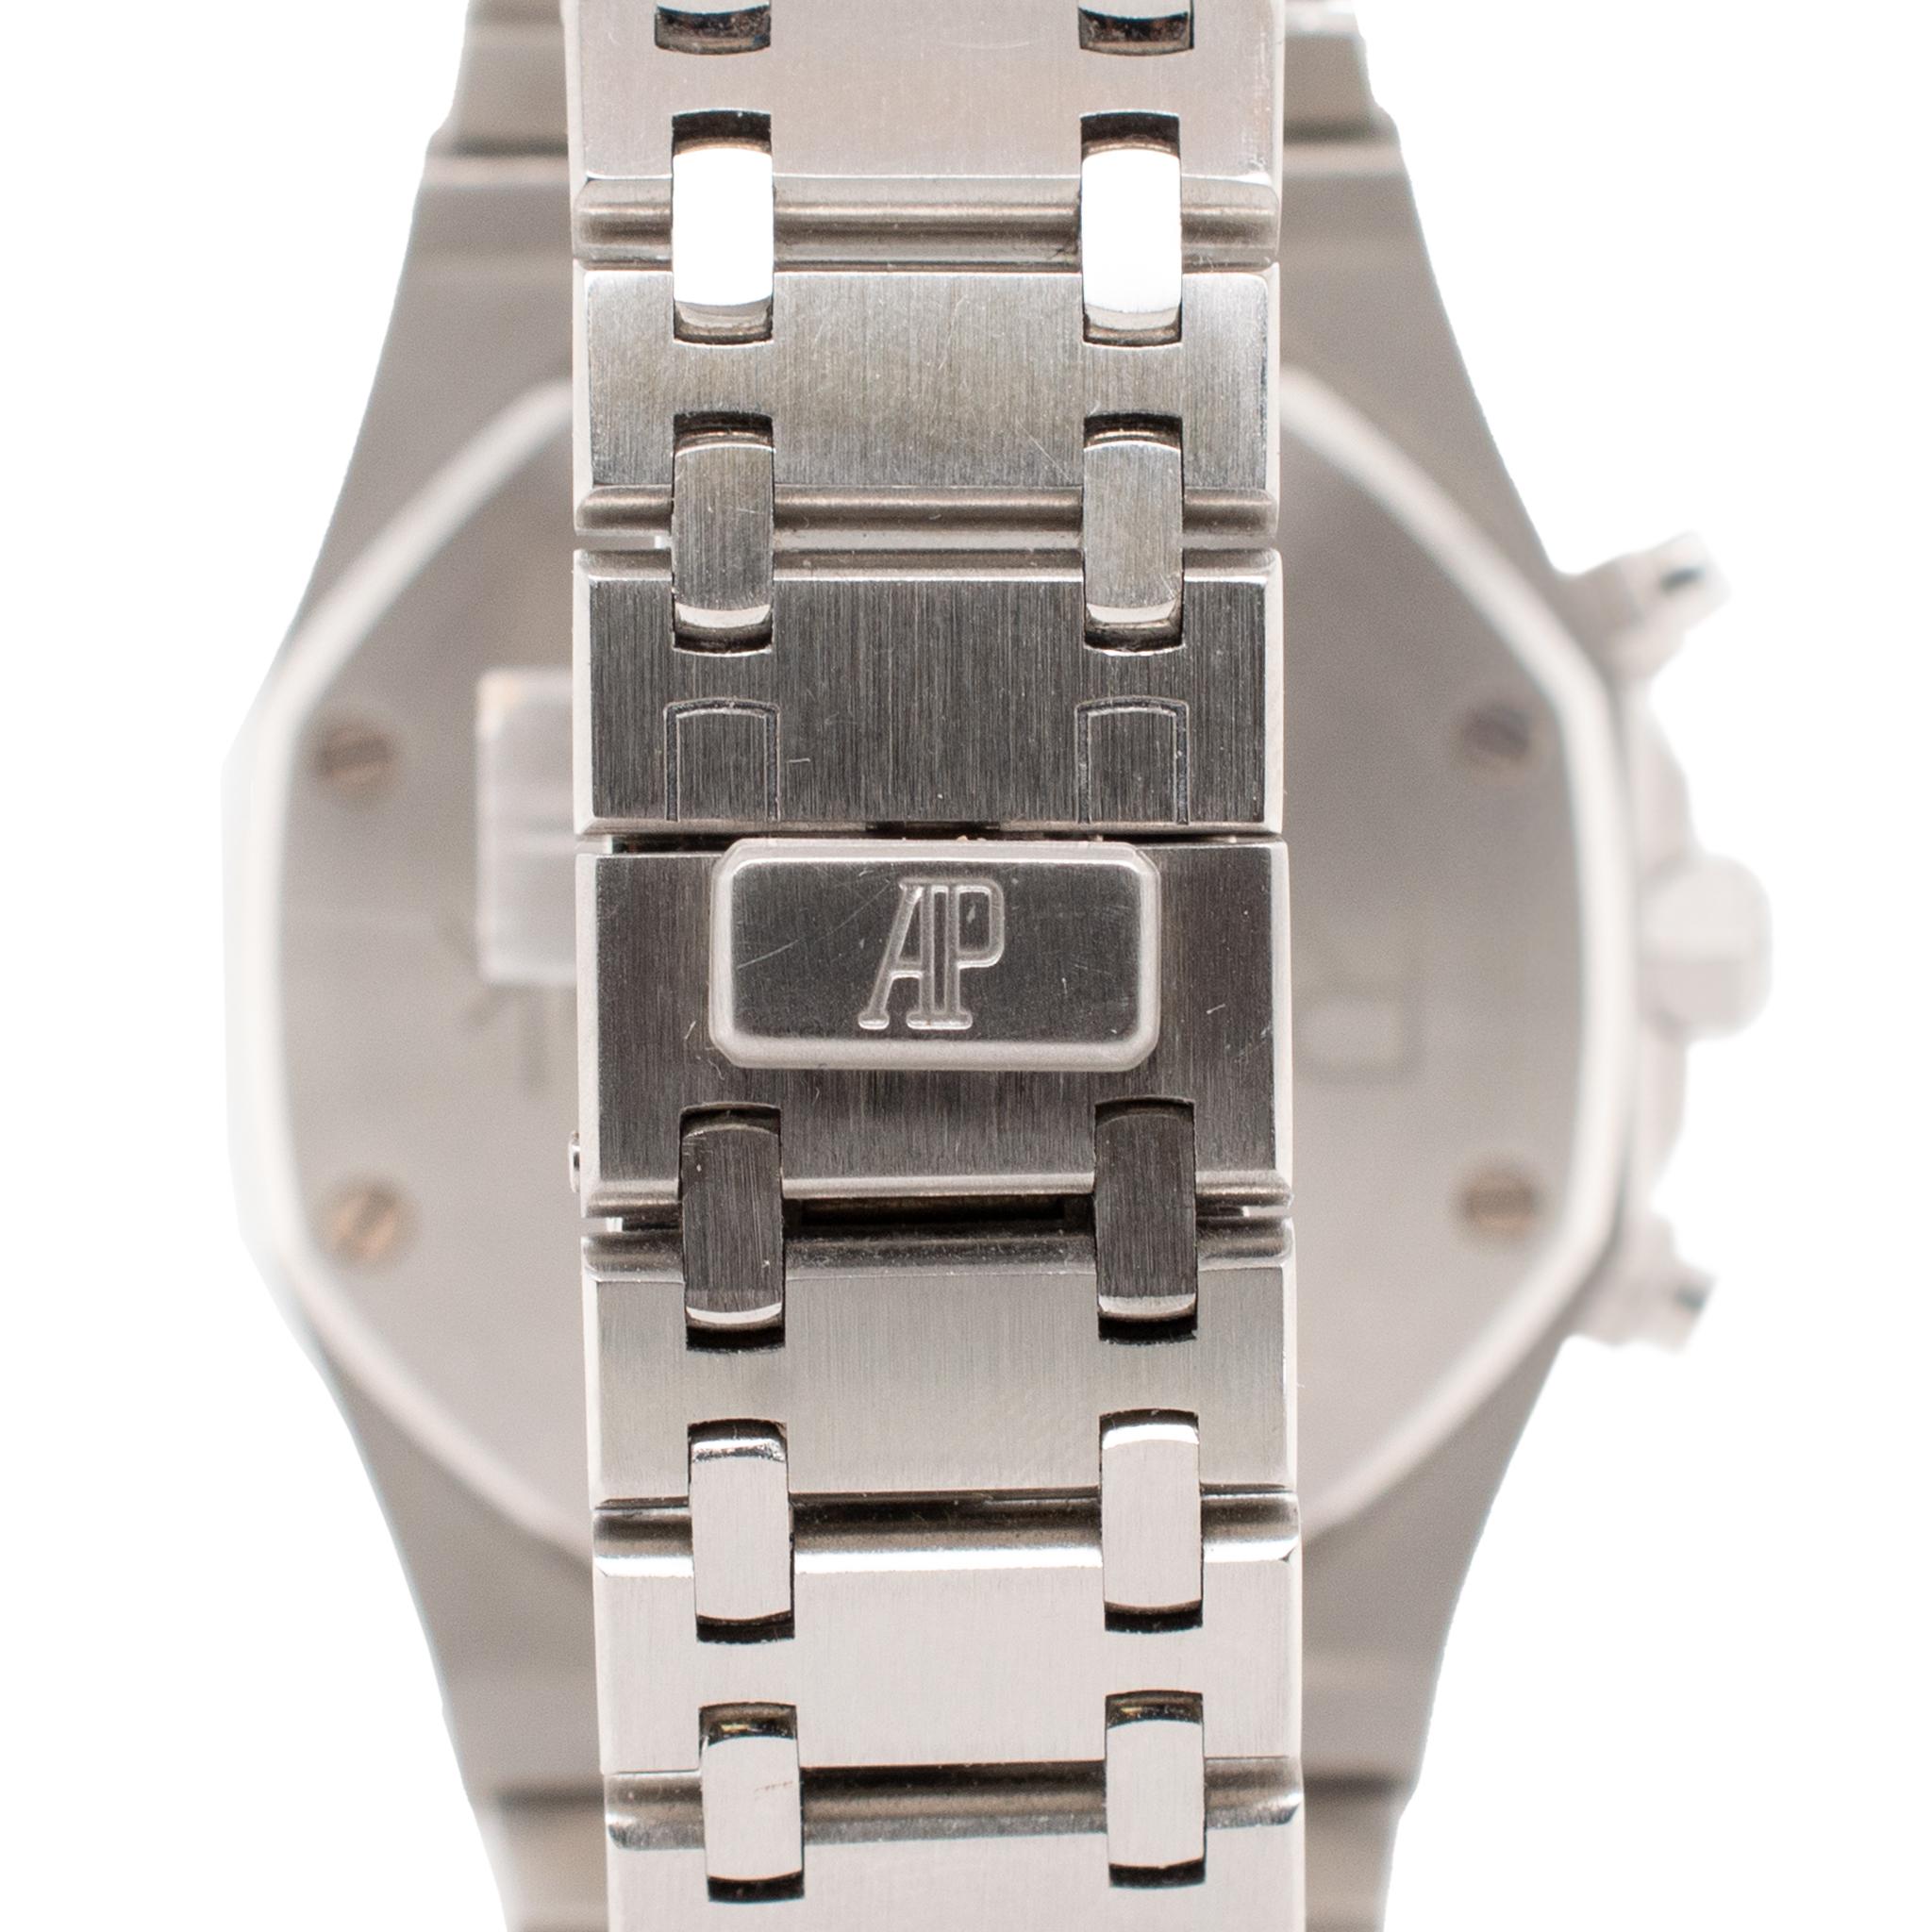 Audemars Piguet Royal Oak 25860 39mm in Stainless Steel In Excellent Condition For Sale In Houston, TX